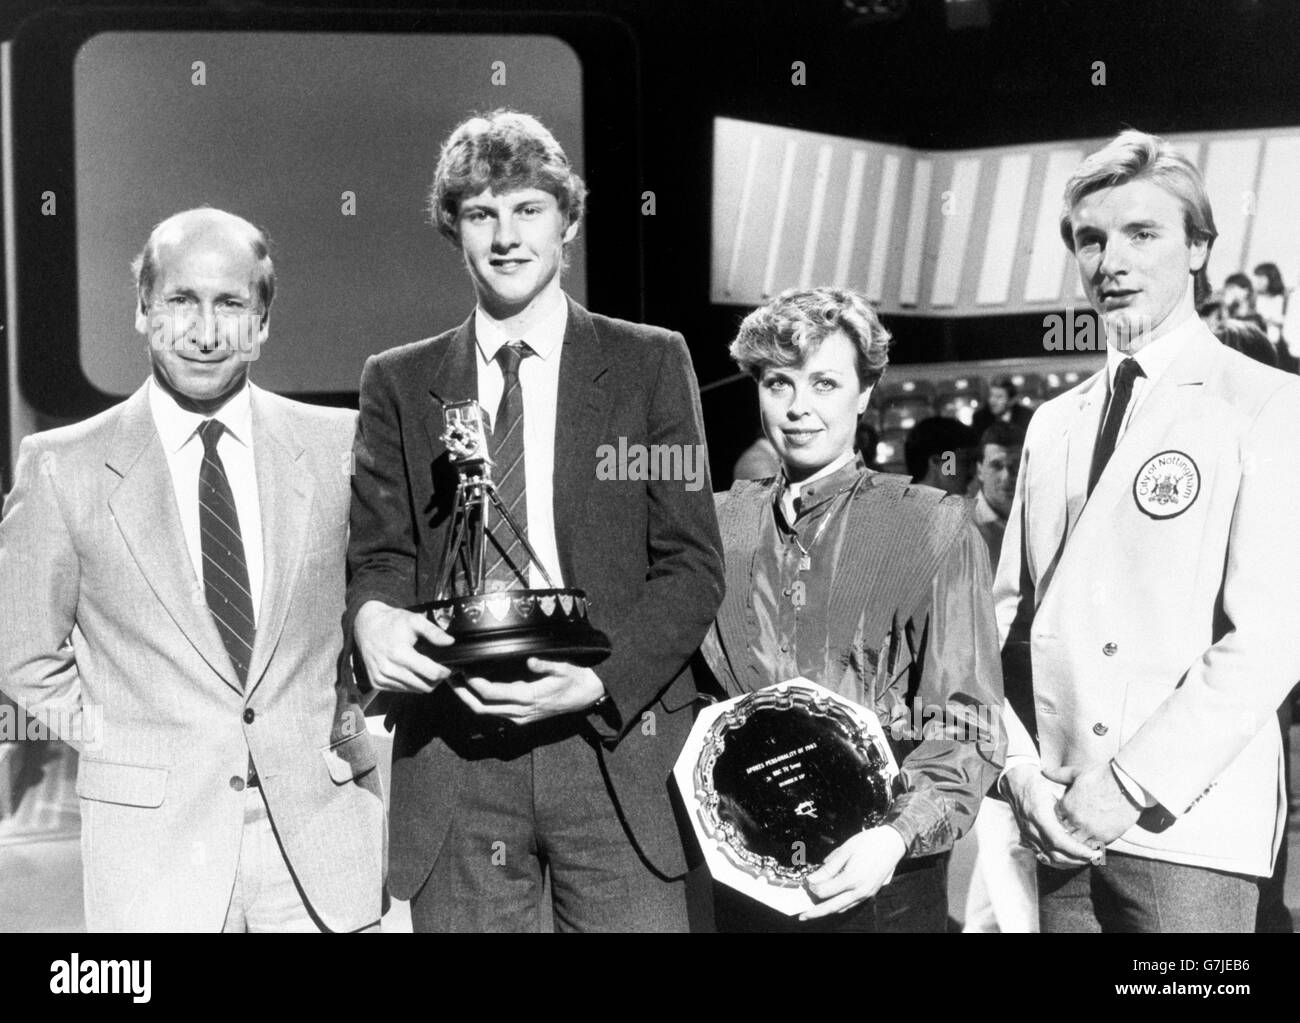 Former footballer Bobby Charlton (left) at the BBC TV Centre, after presenting awards to BBC Sports Personality of the Year Steve Cram, and runners-up Jayne Torvill and Christopher Dean. Stock Photo